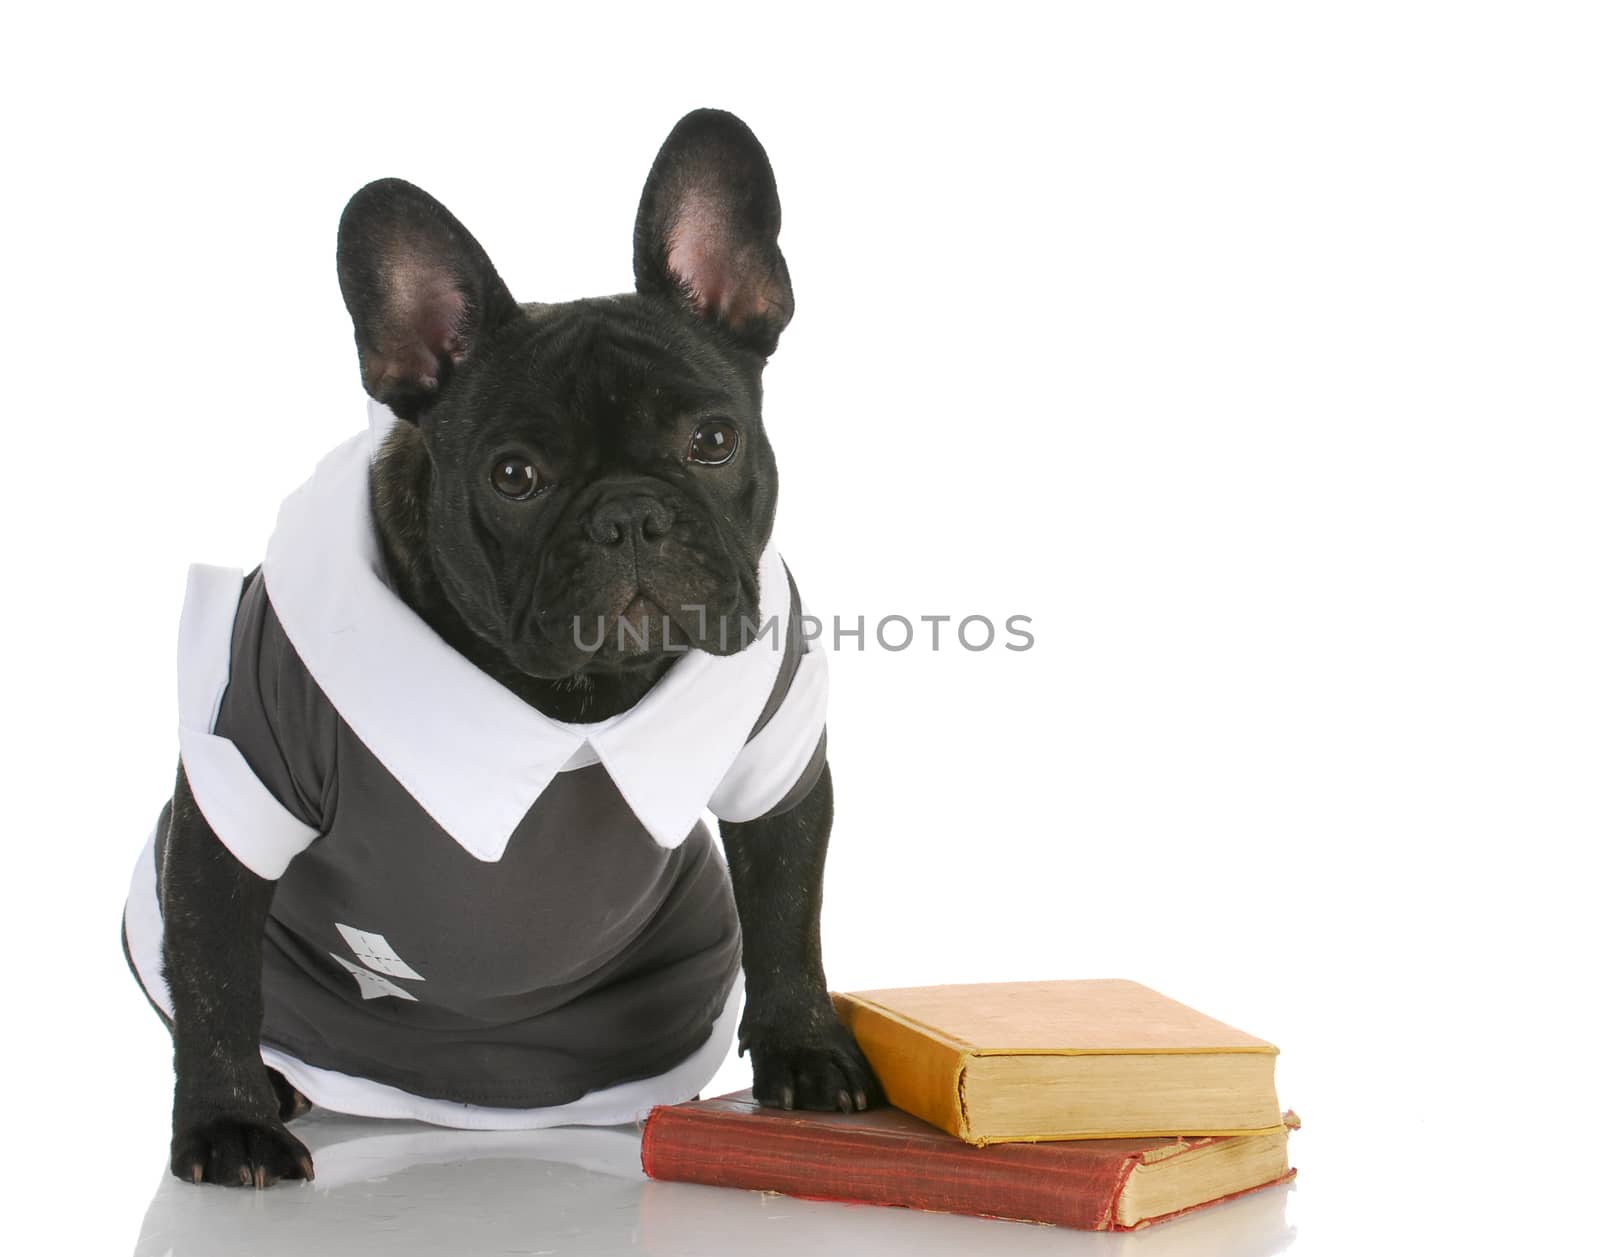 dog obedience school - french bulldog wearing shirt sitting with books